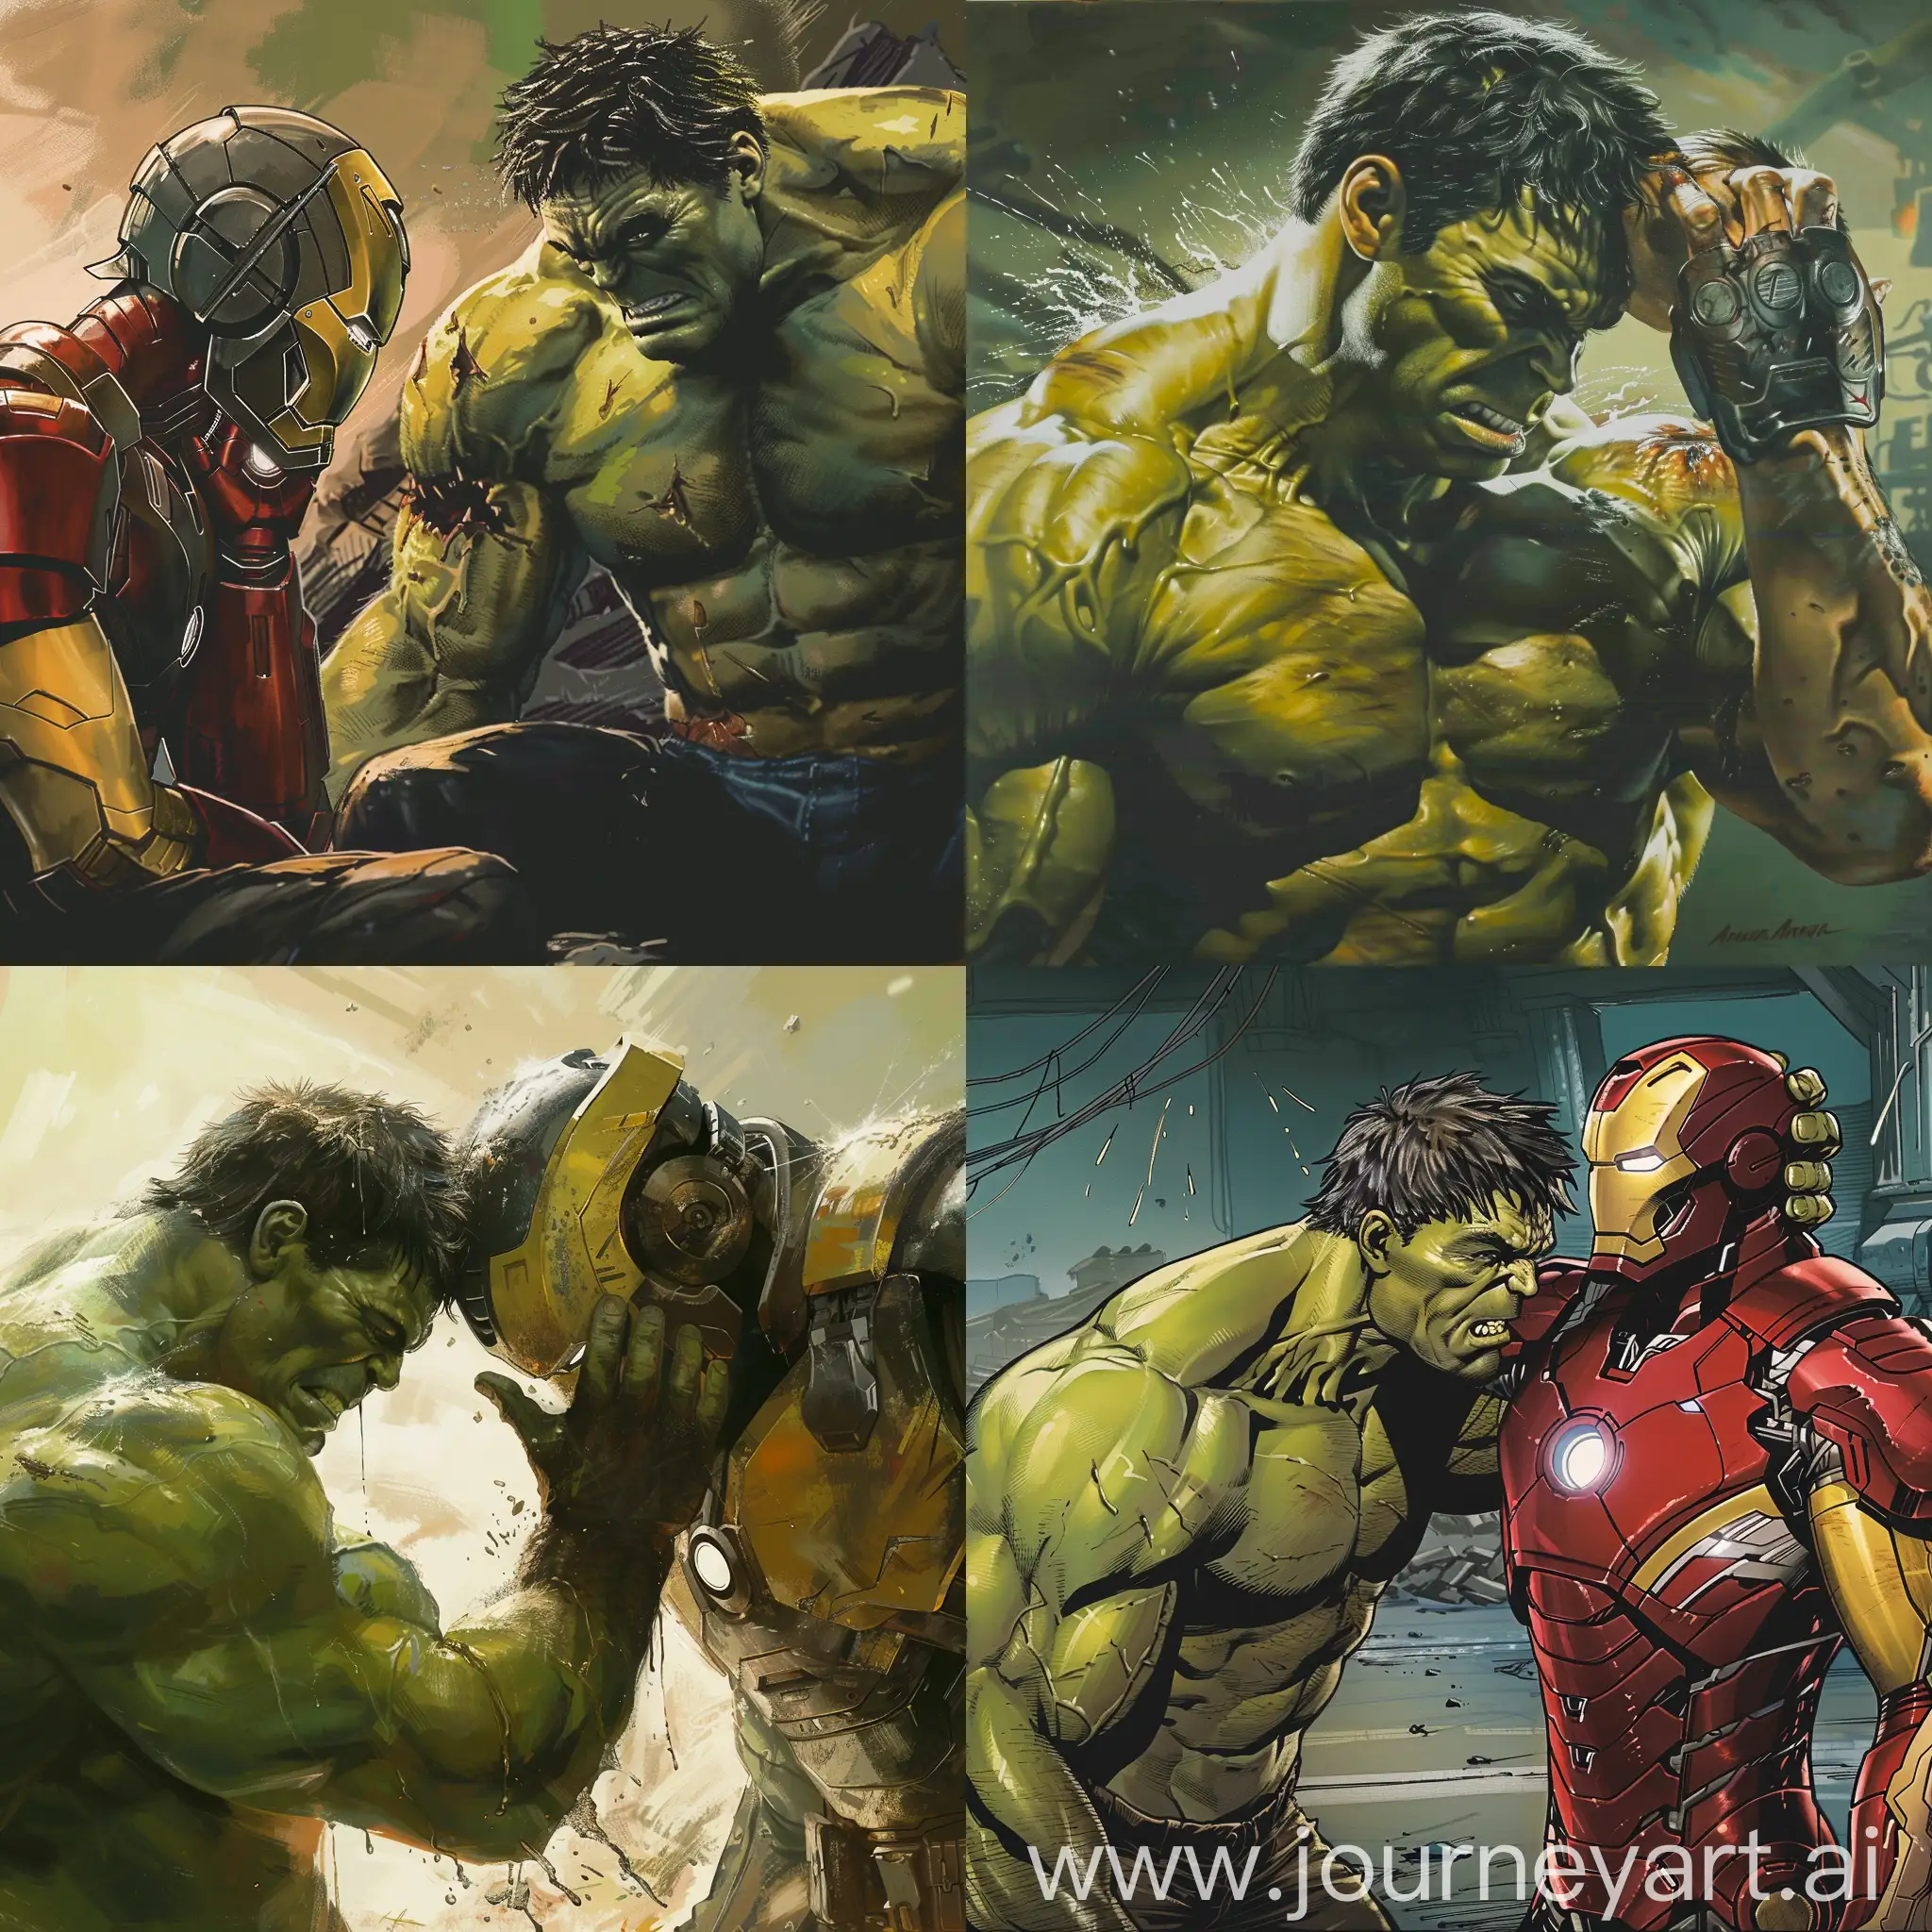 Epic-Battle-Hulk-vs-Iron-Martin-Concludes-with-a-Show-of-Dominance